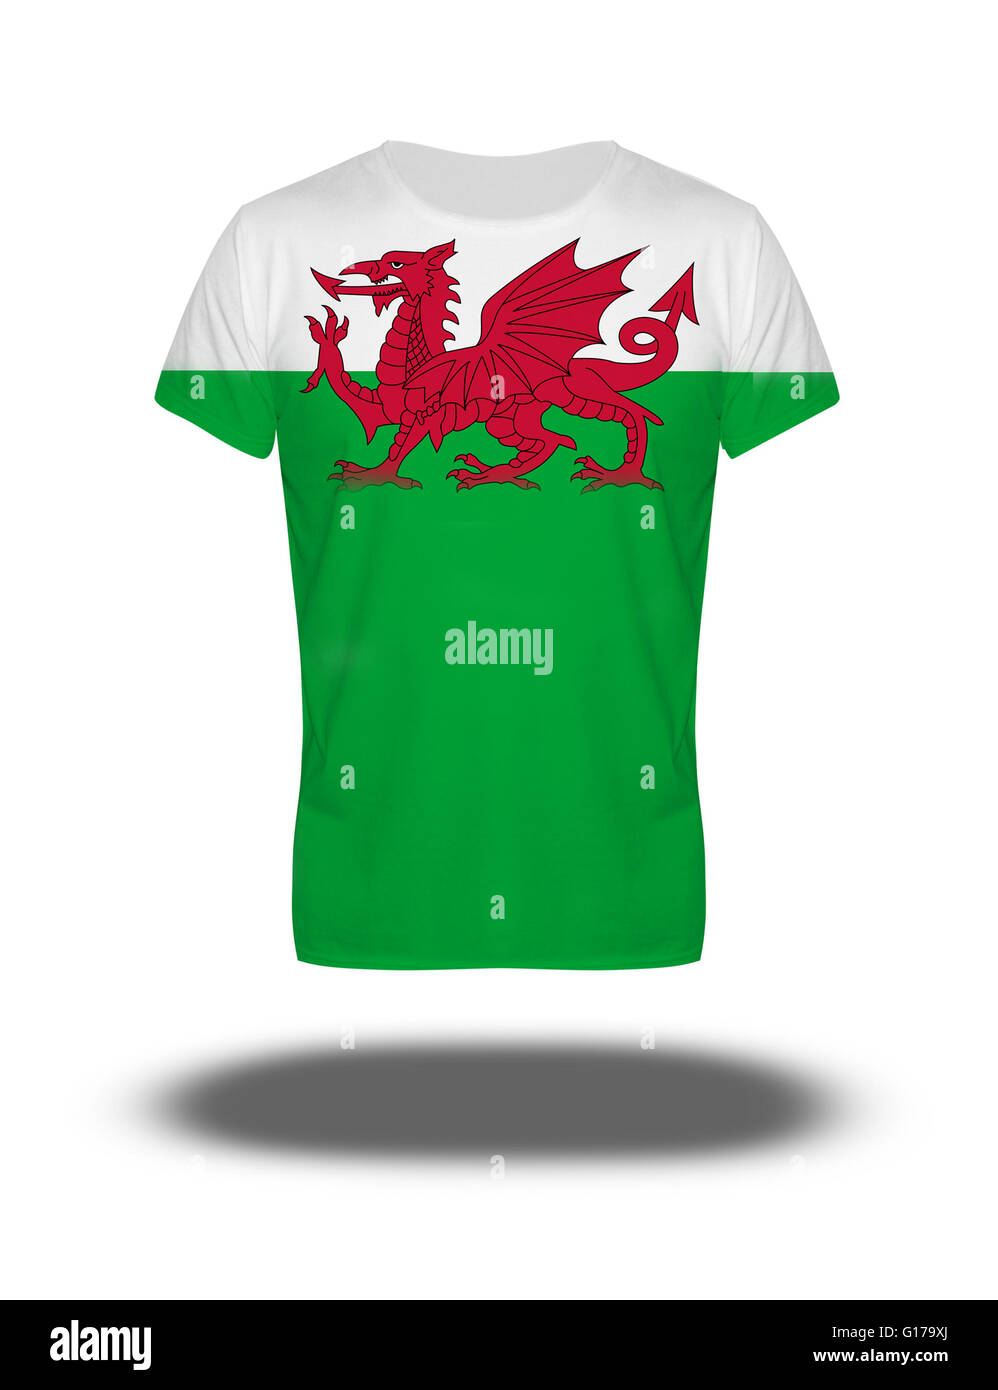 Wales flag t-shirt on white background with shadow Stock Photo